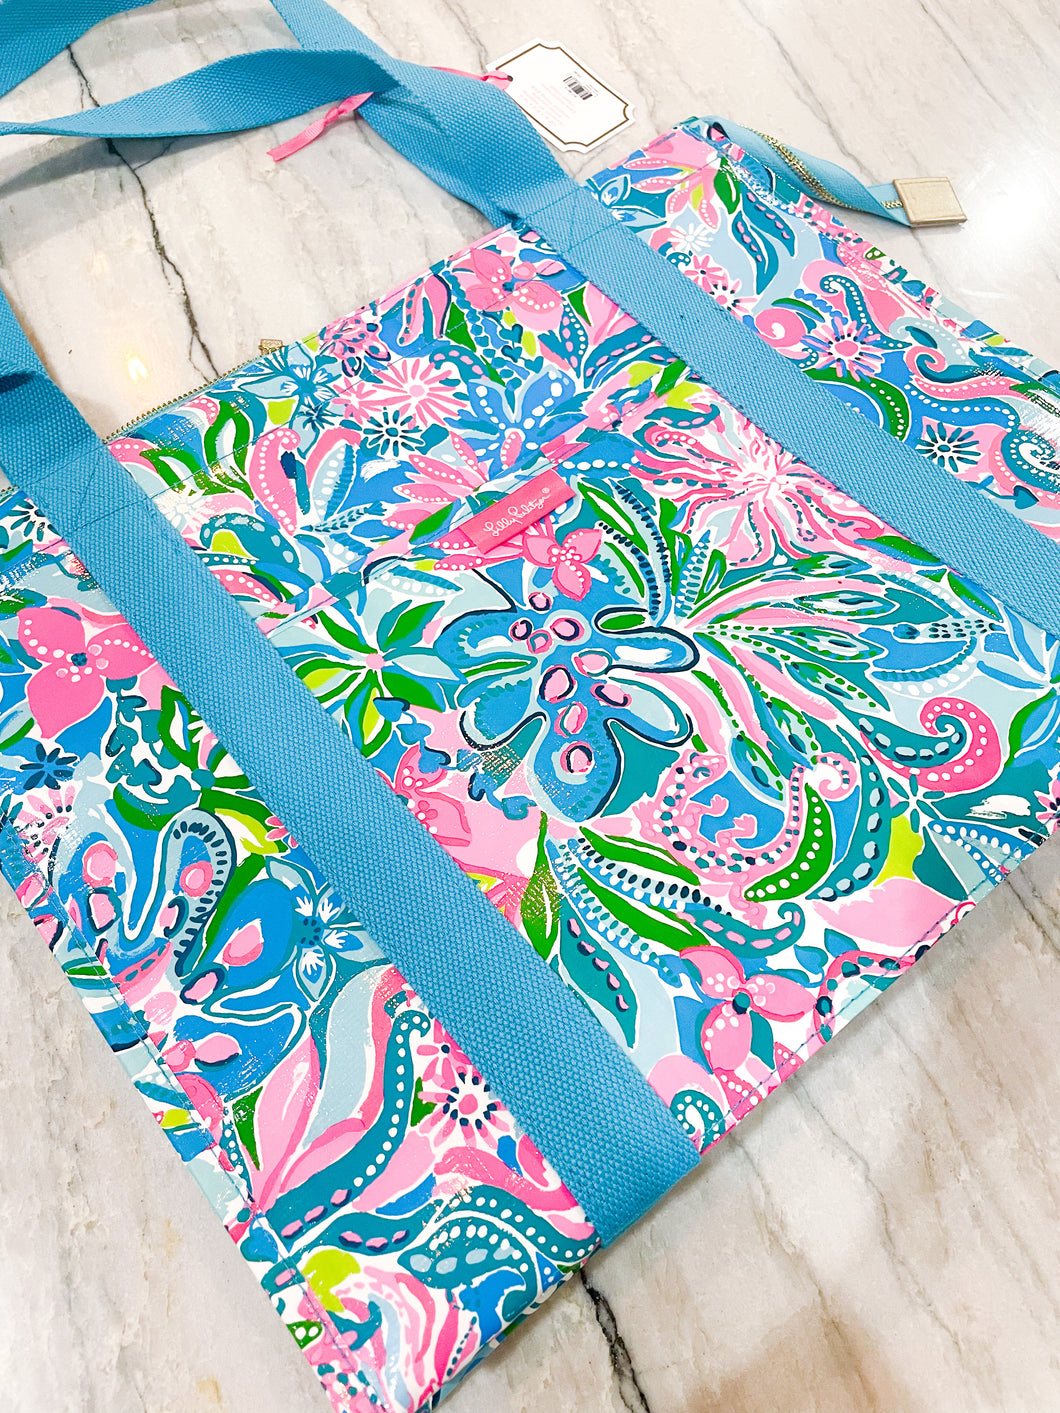 Lilly Pulitzer Insulated Market Shopper